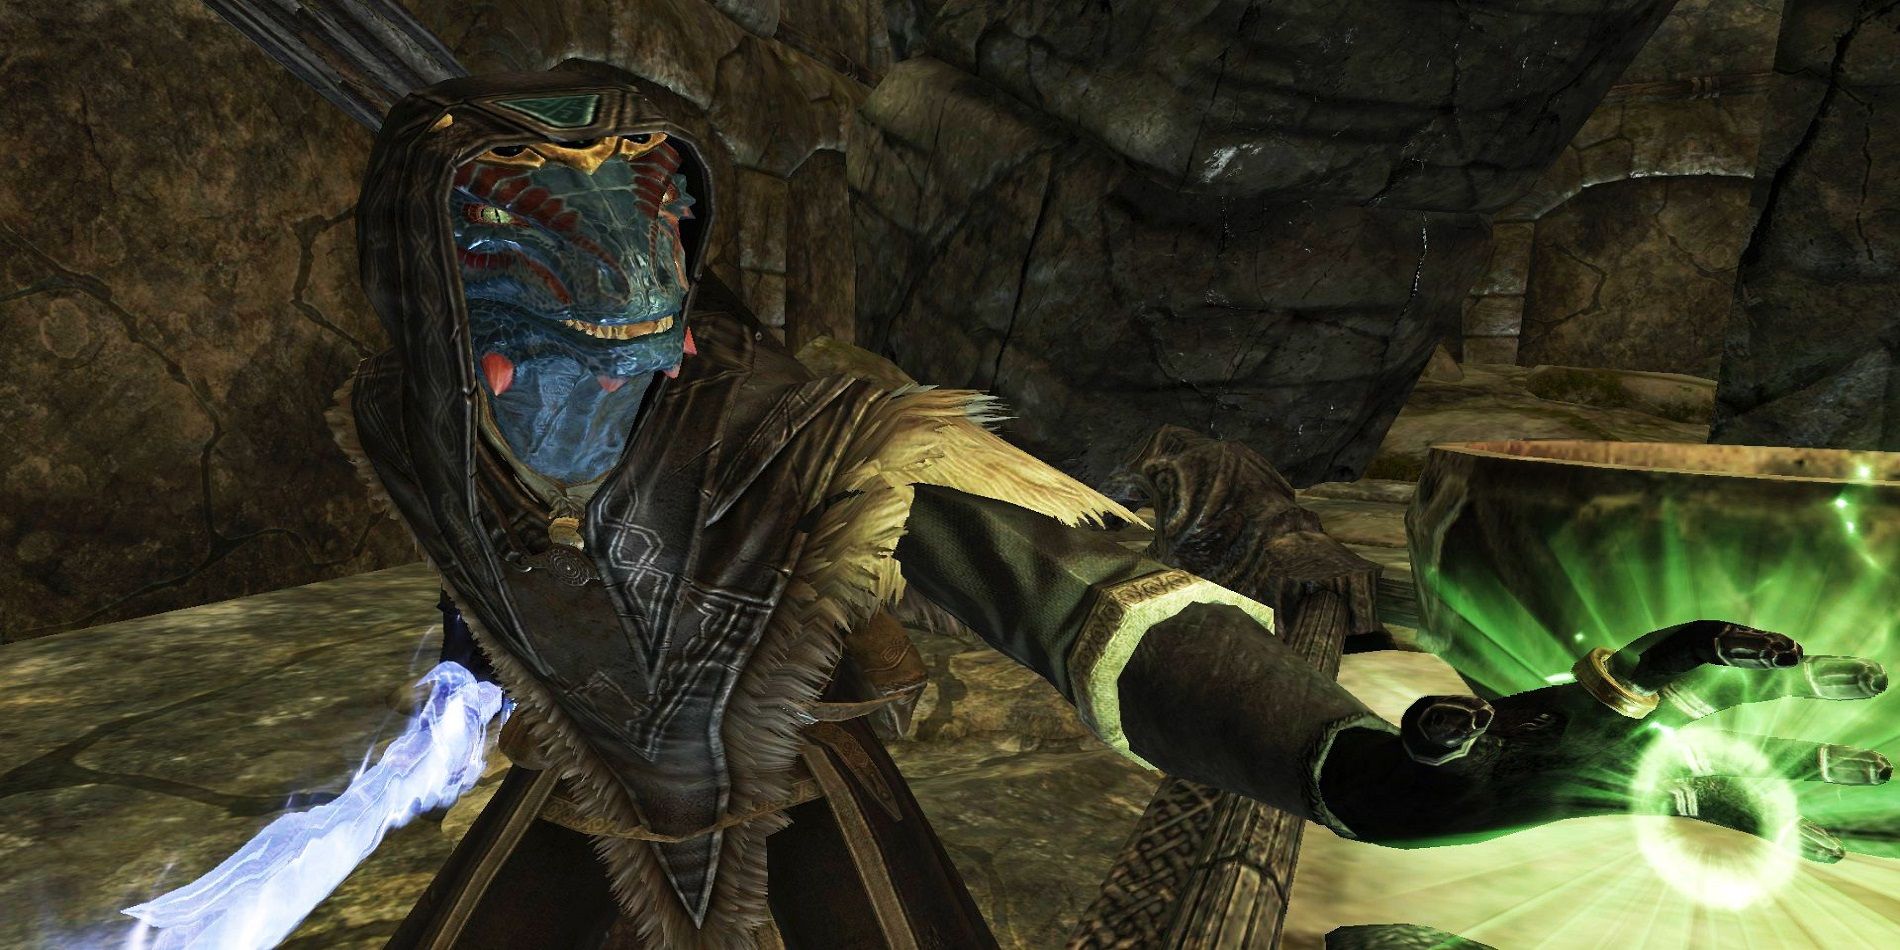 Elder Scrolls Blue Argonian in Skyrim Wielding a Sword and Green Magic Hooded Arch-Mage Robes in a Crypt